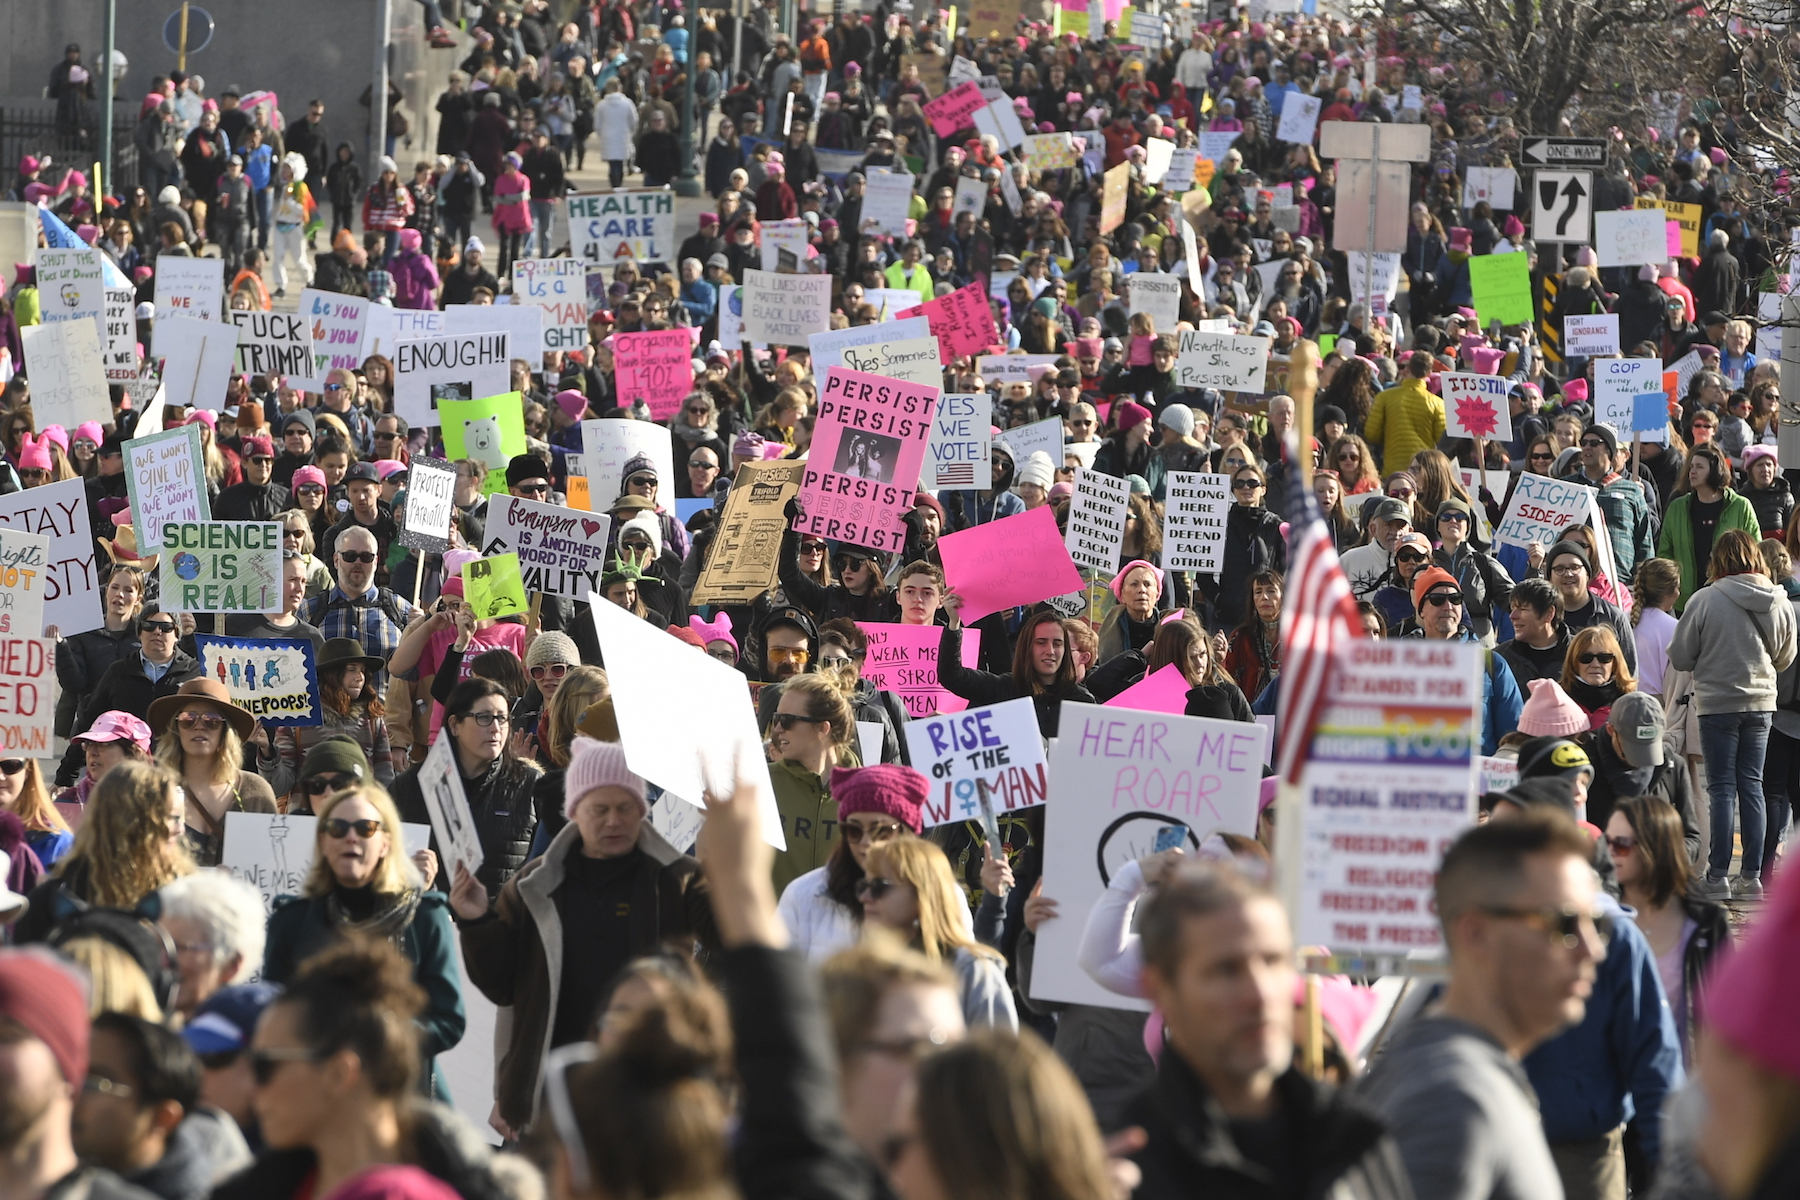 PHOTOS: Women's marches across the country | abc7.com1800 x 1200